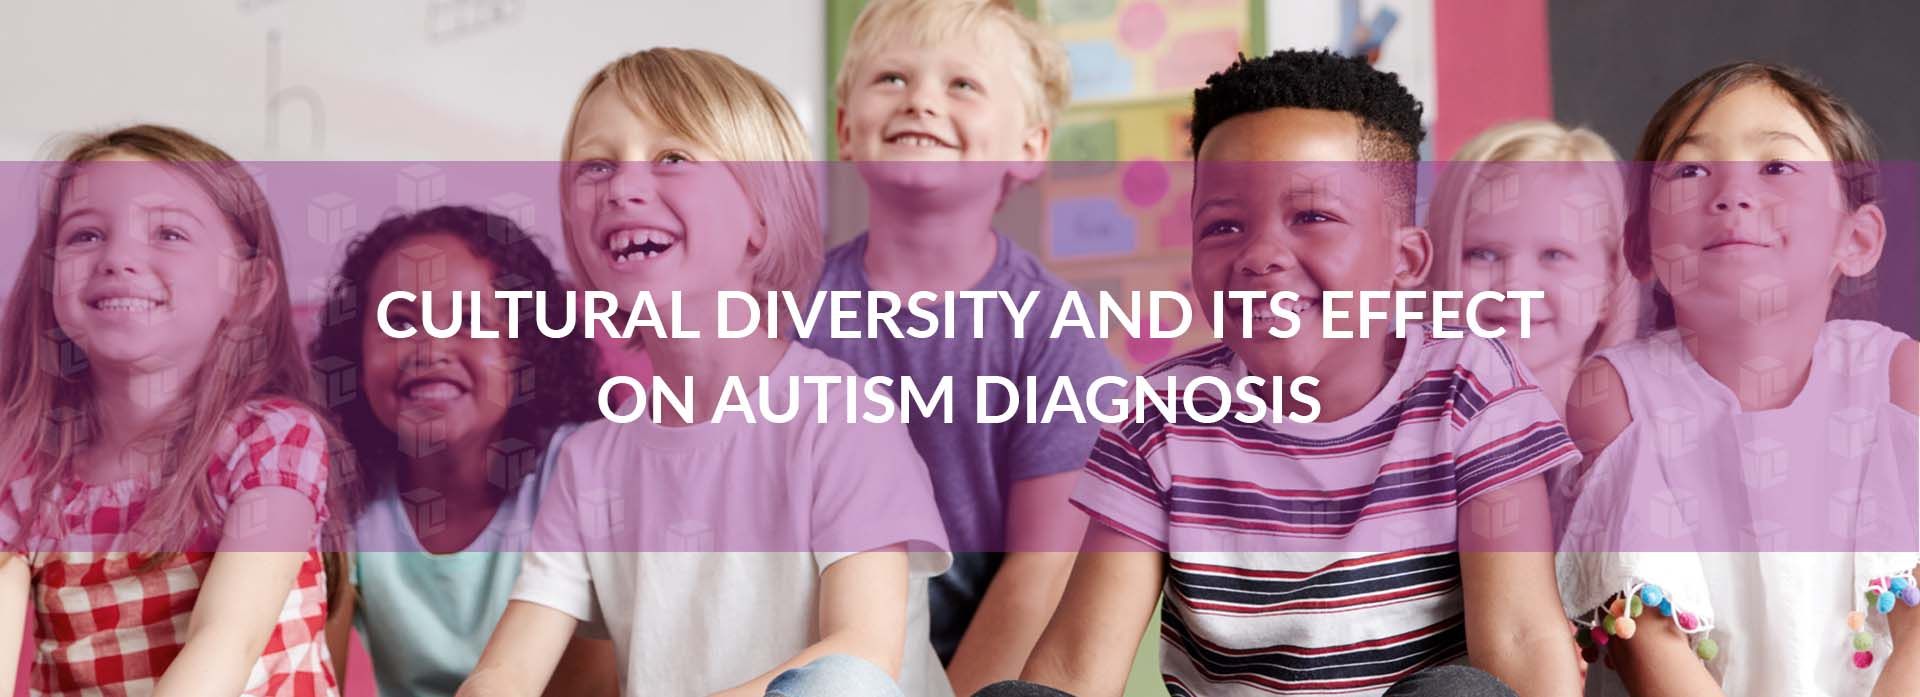 Cultural Diversity And Its Effect On Autism Diagnosis Cultural Diversity And Its Effect On Autism Diagnosis Cultural Diversity And Its Effect On Autism Diagnosis